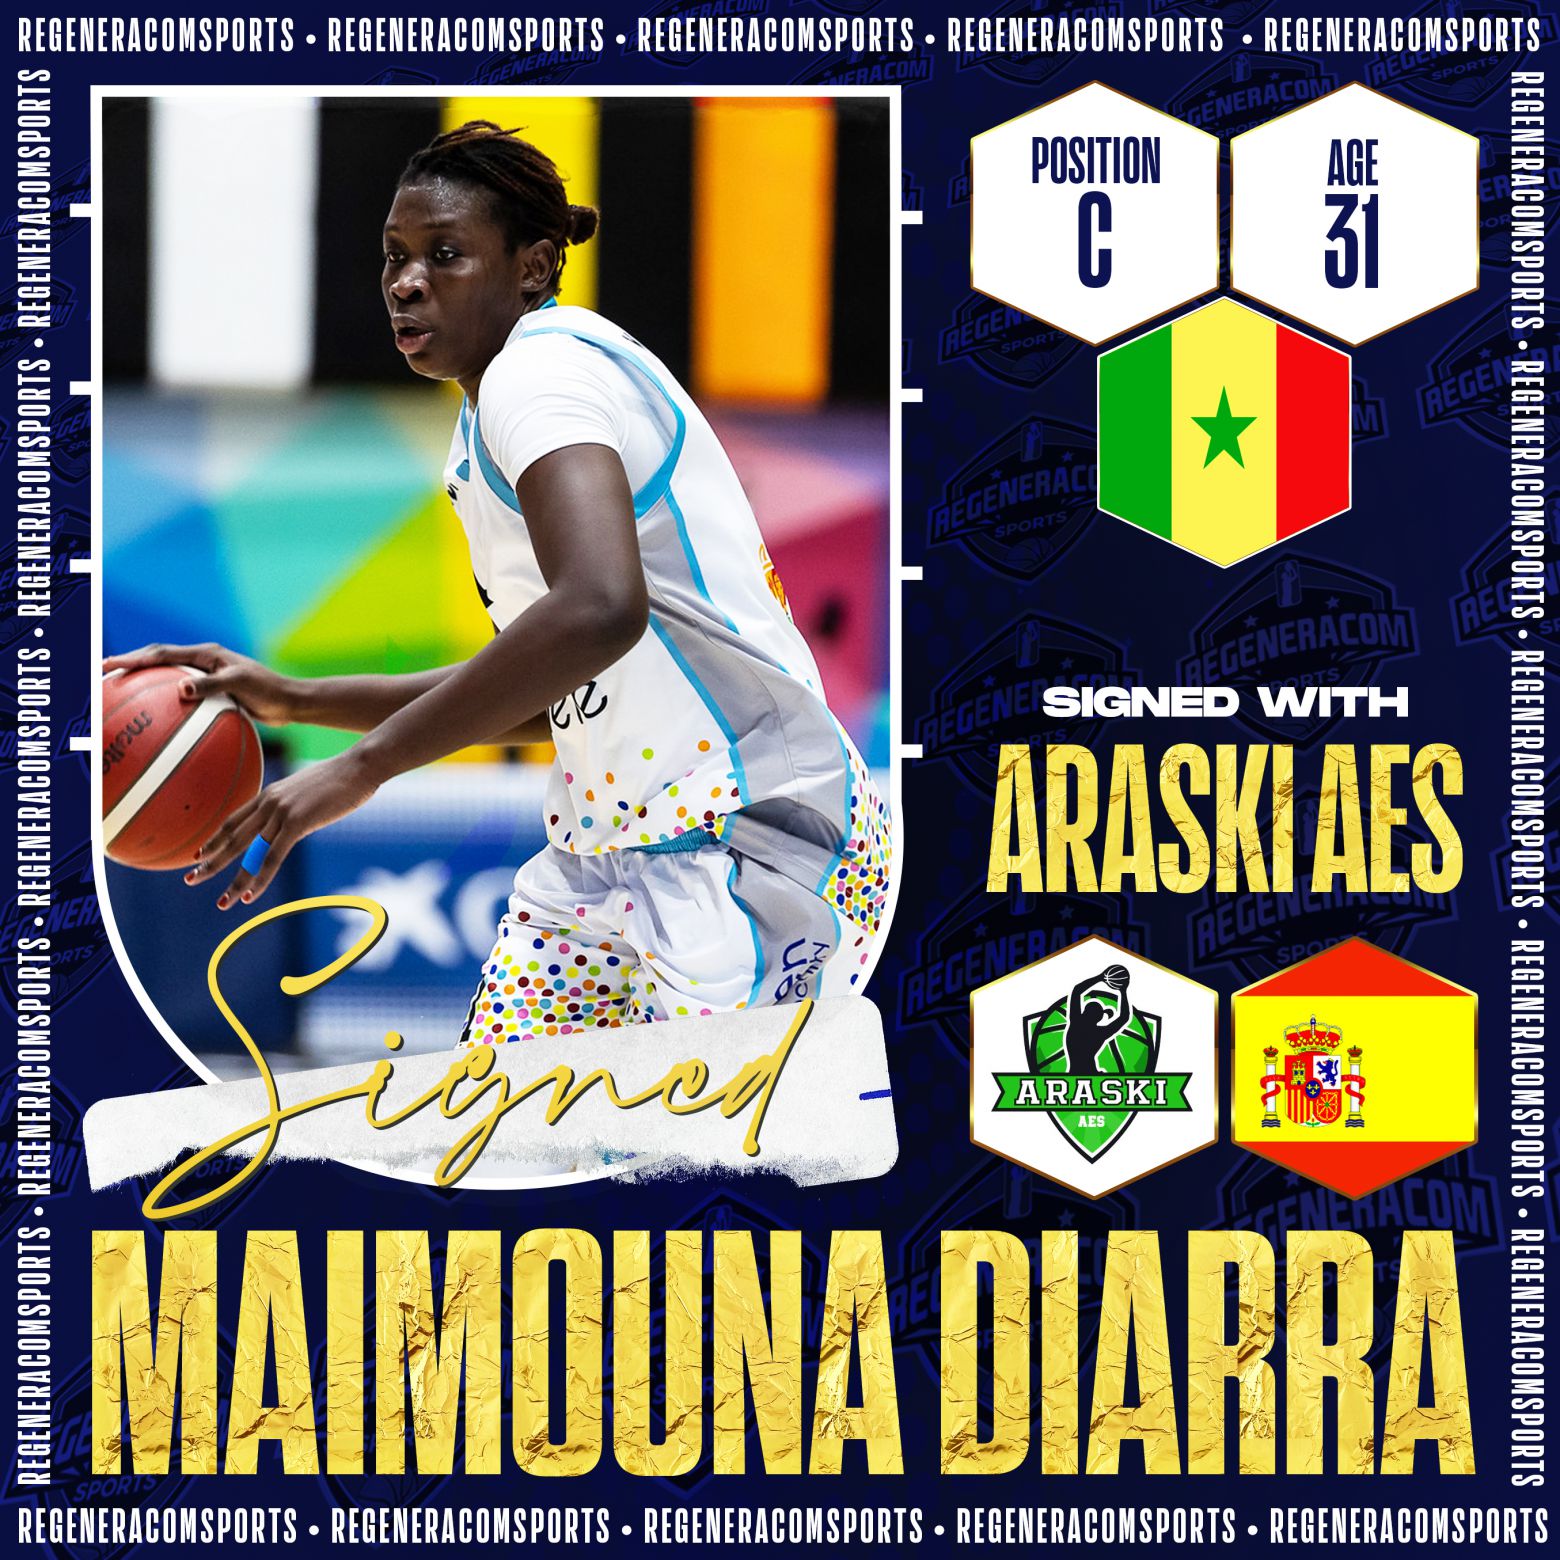 MAIMOUNA DIARRA has signed with Campus Promete for the 2022/23 season